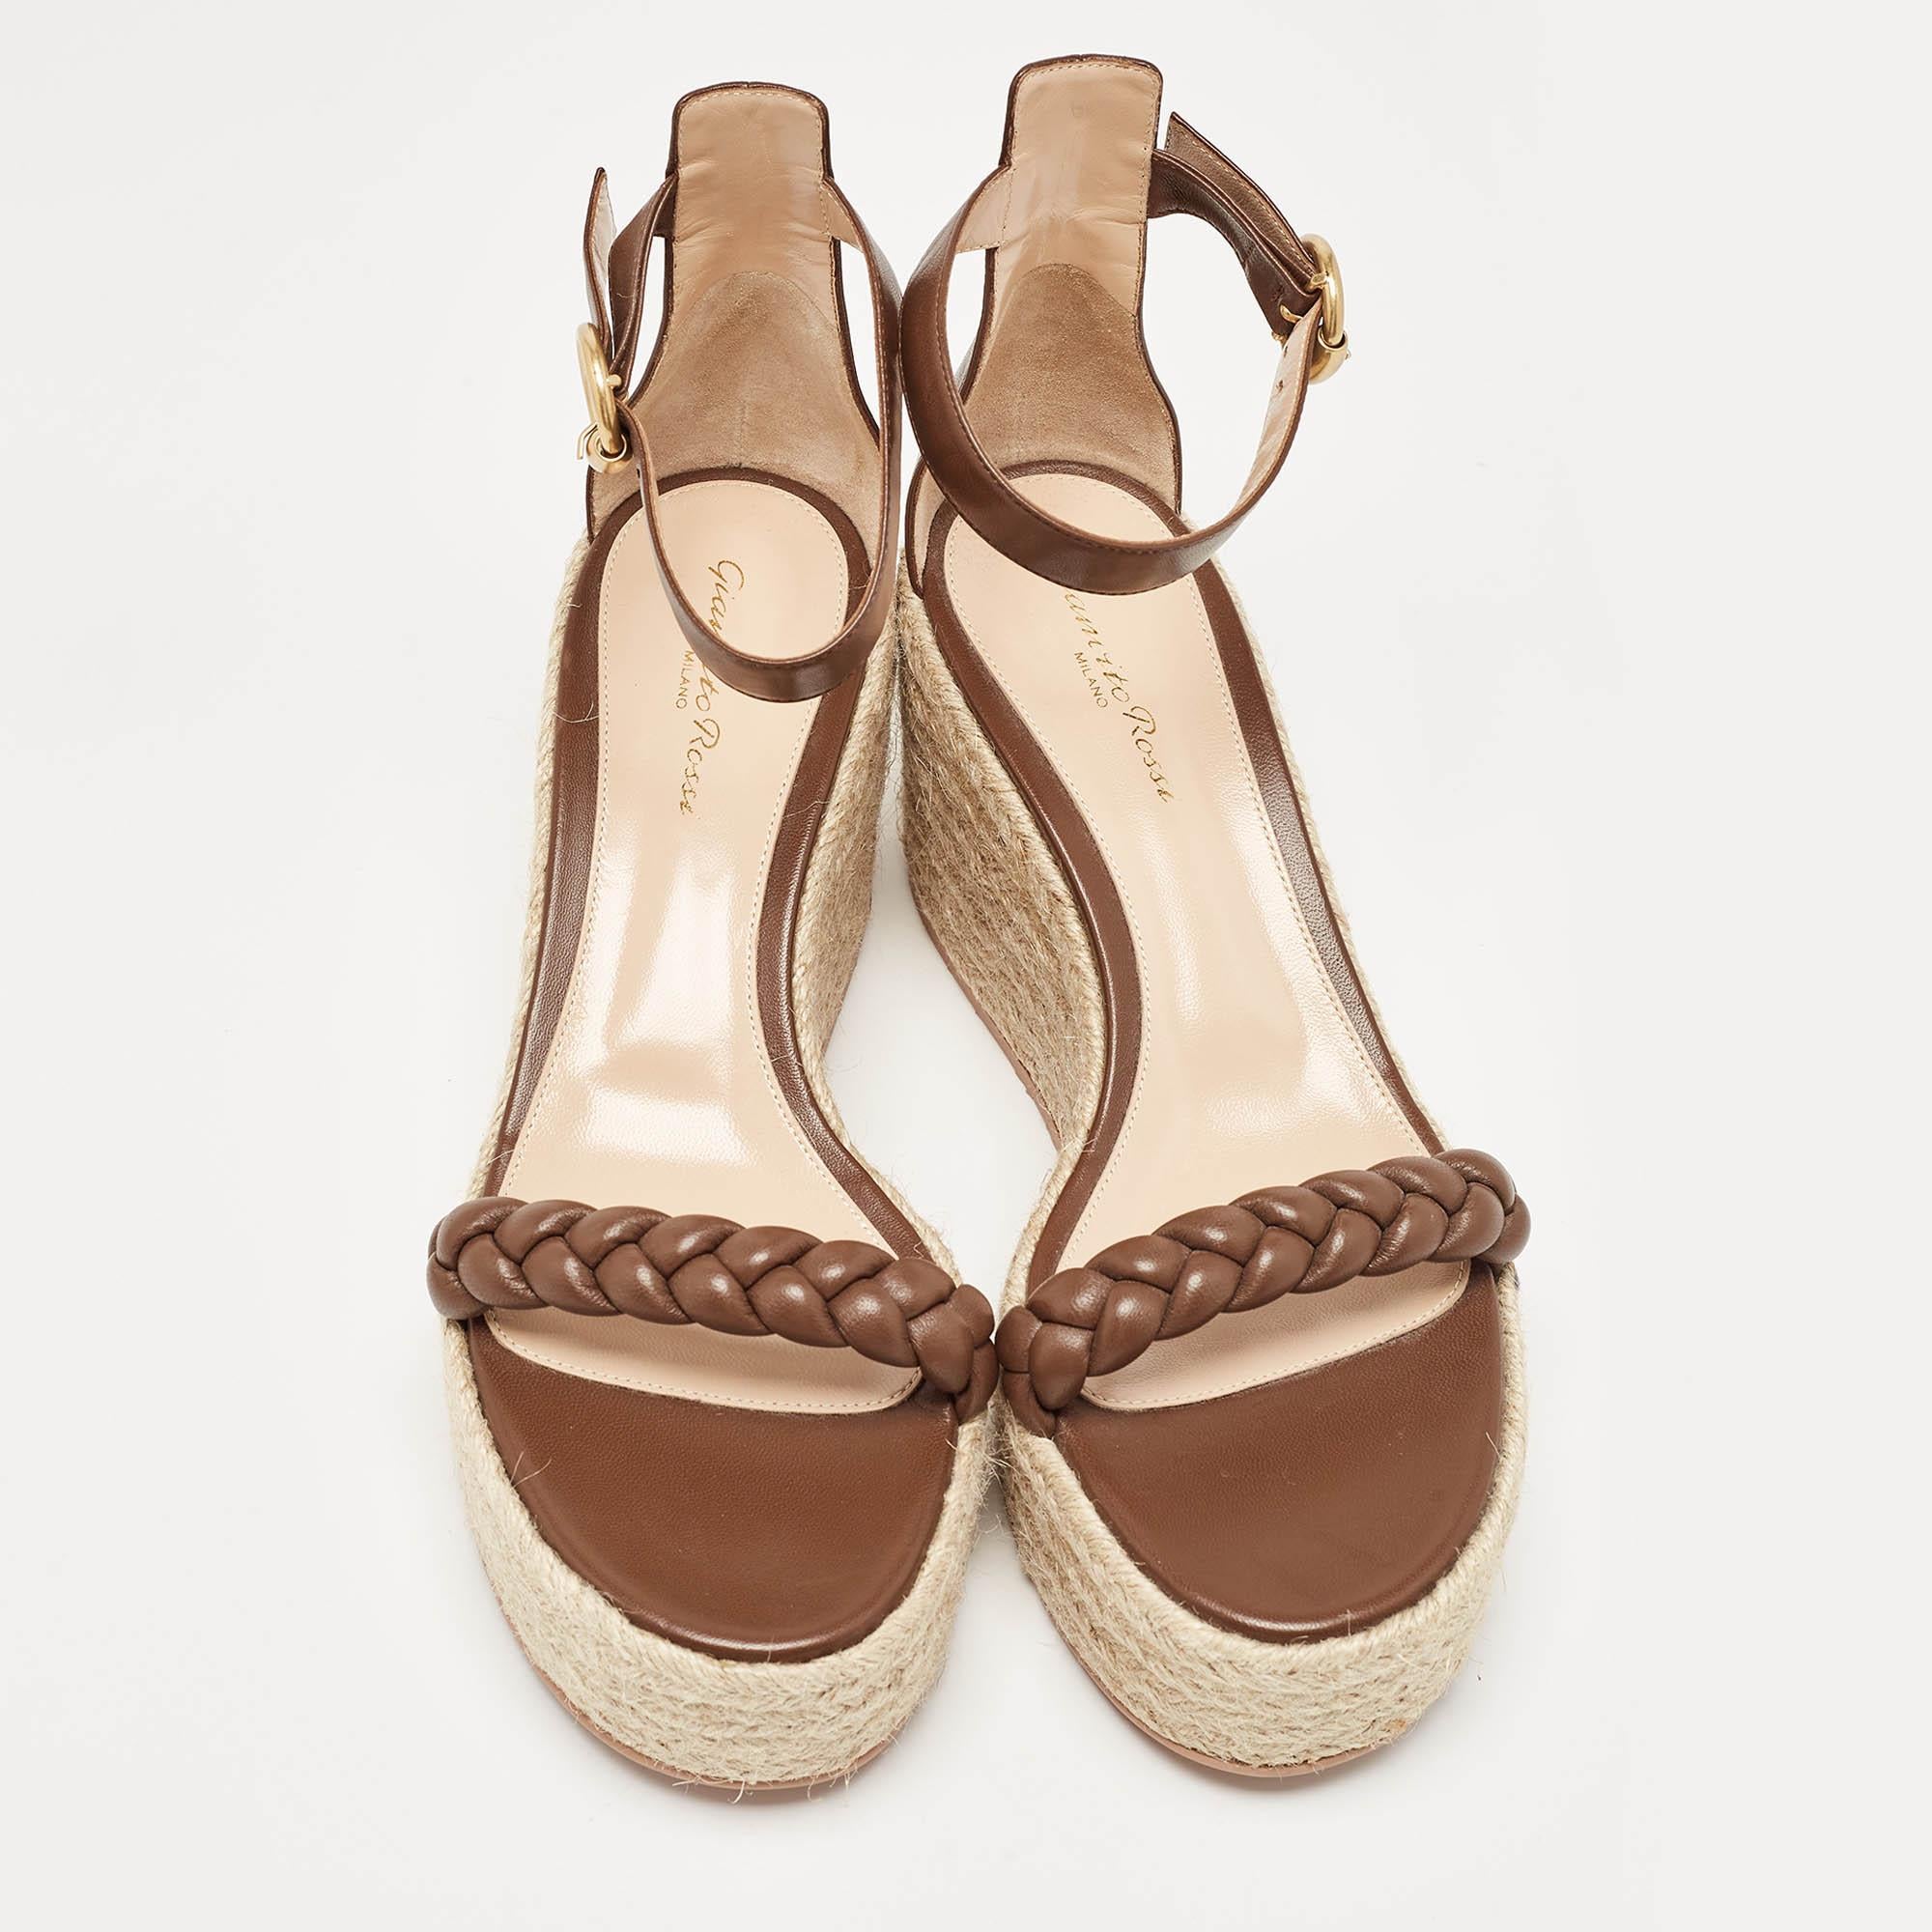 Crafted with meticulous artistry, the Gianvito Rossi Merida sandals epitomize timeless charm. Luxurious brown leather intertwines gracefully, forming intricate braids that exude sophistication. Elevated on a sturdy wedge heel, they seamlessly marry